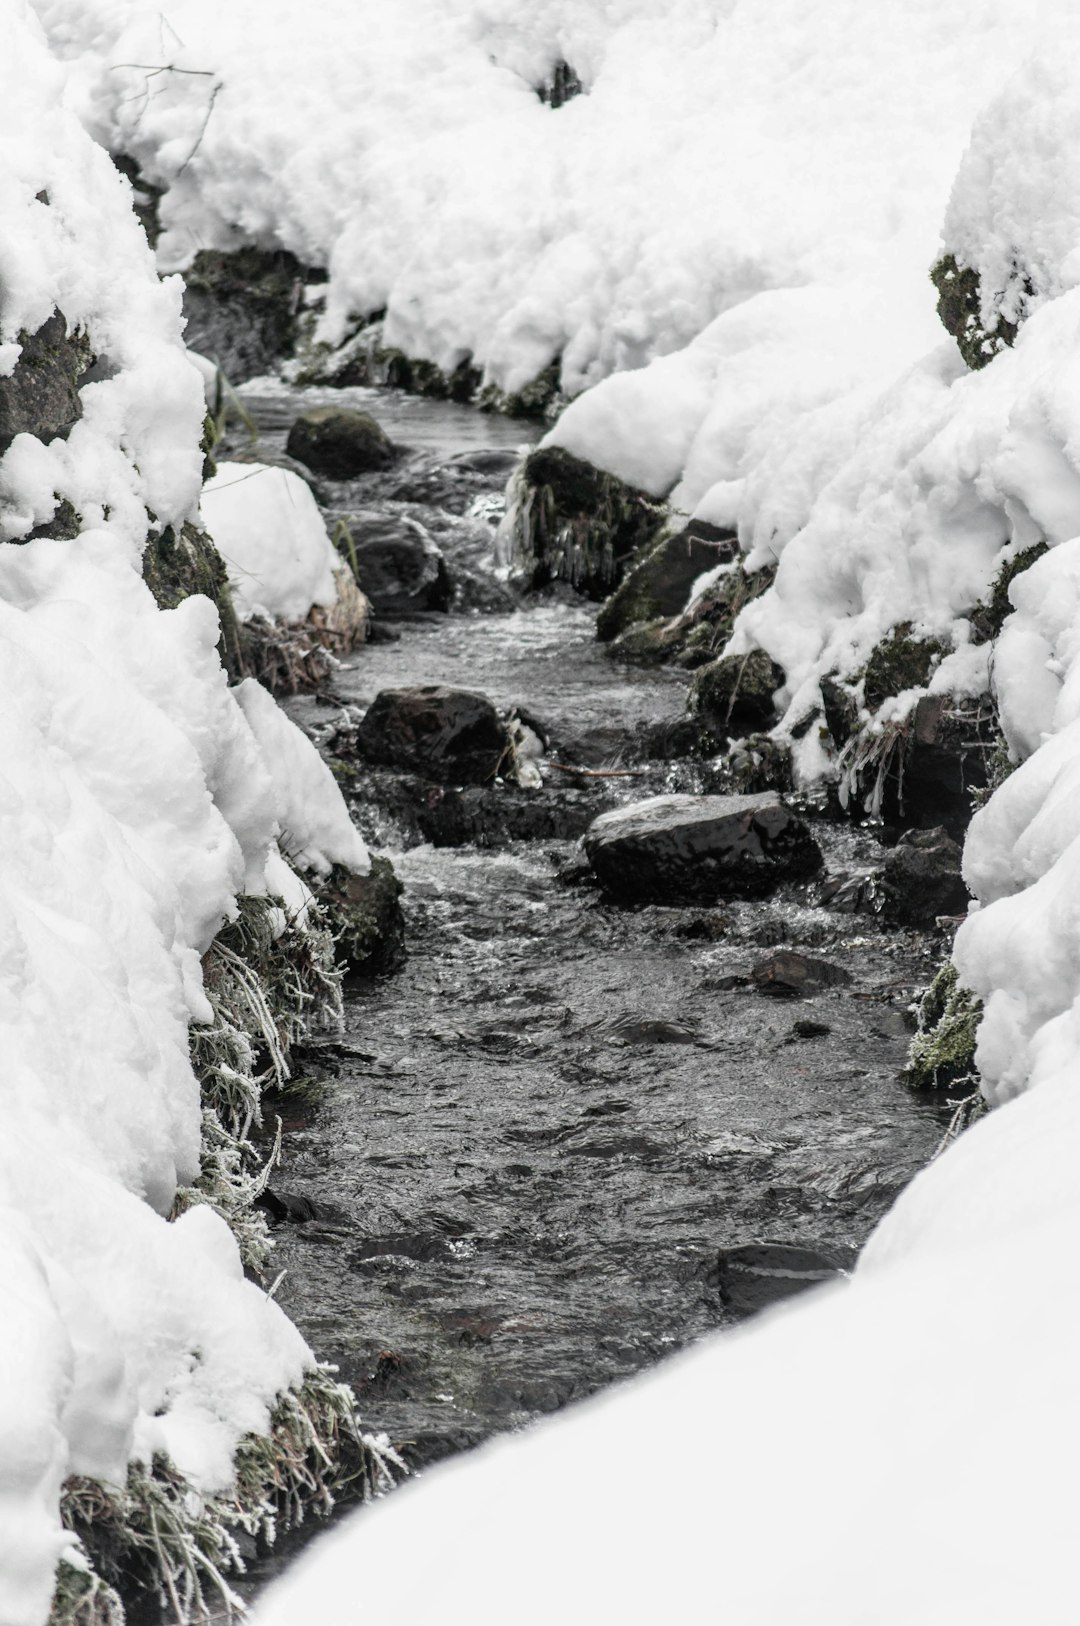 snow covered rocks and river